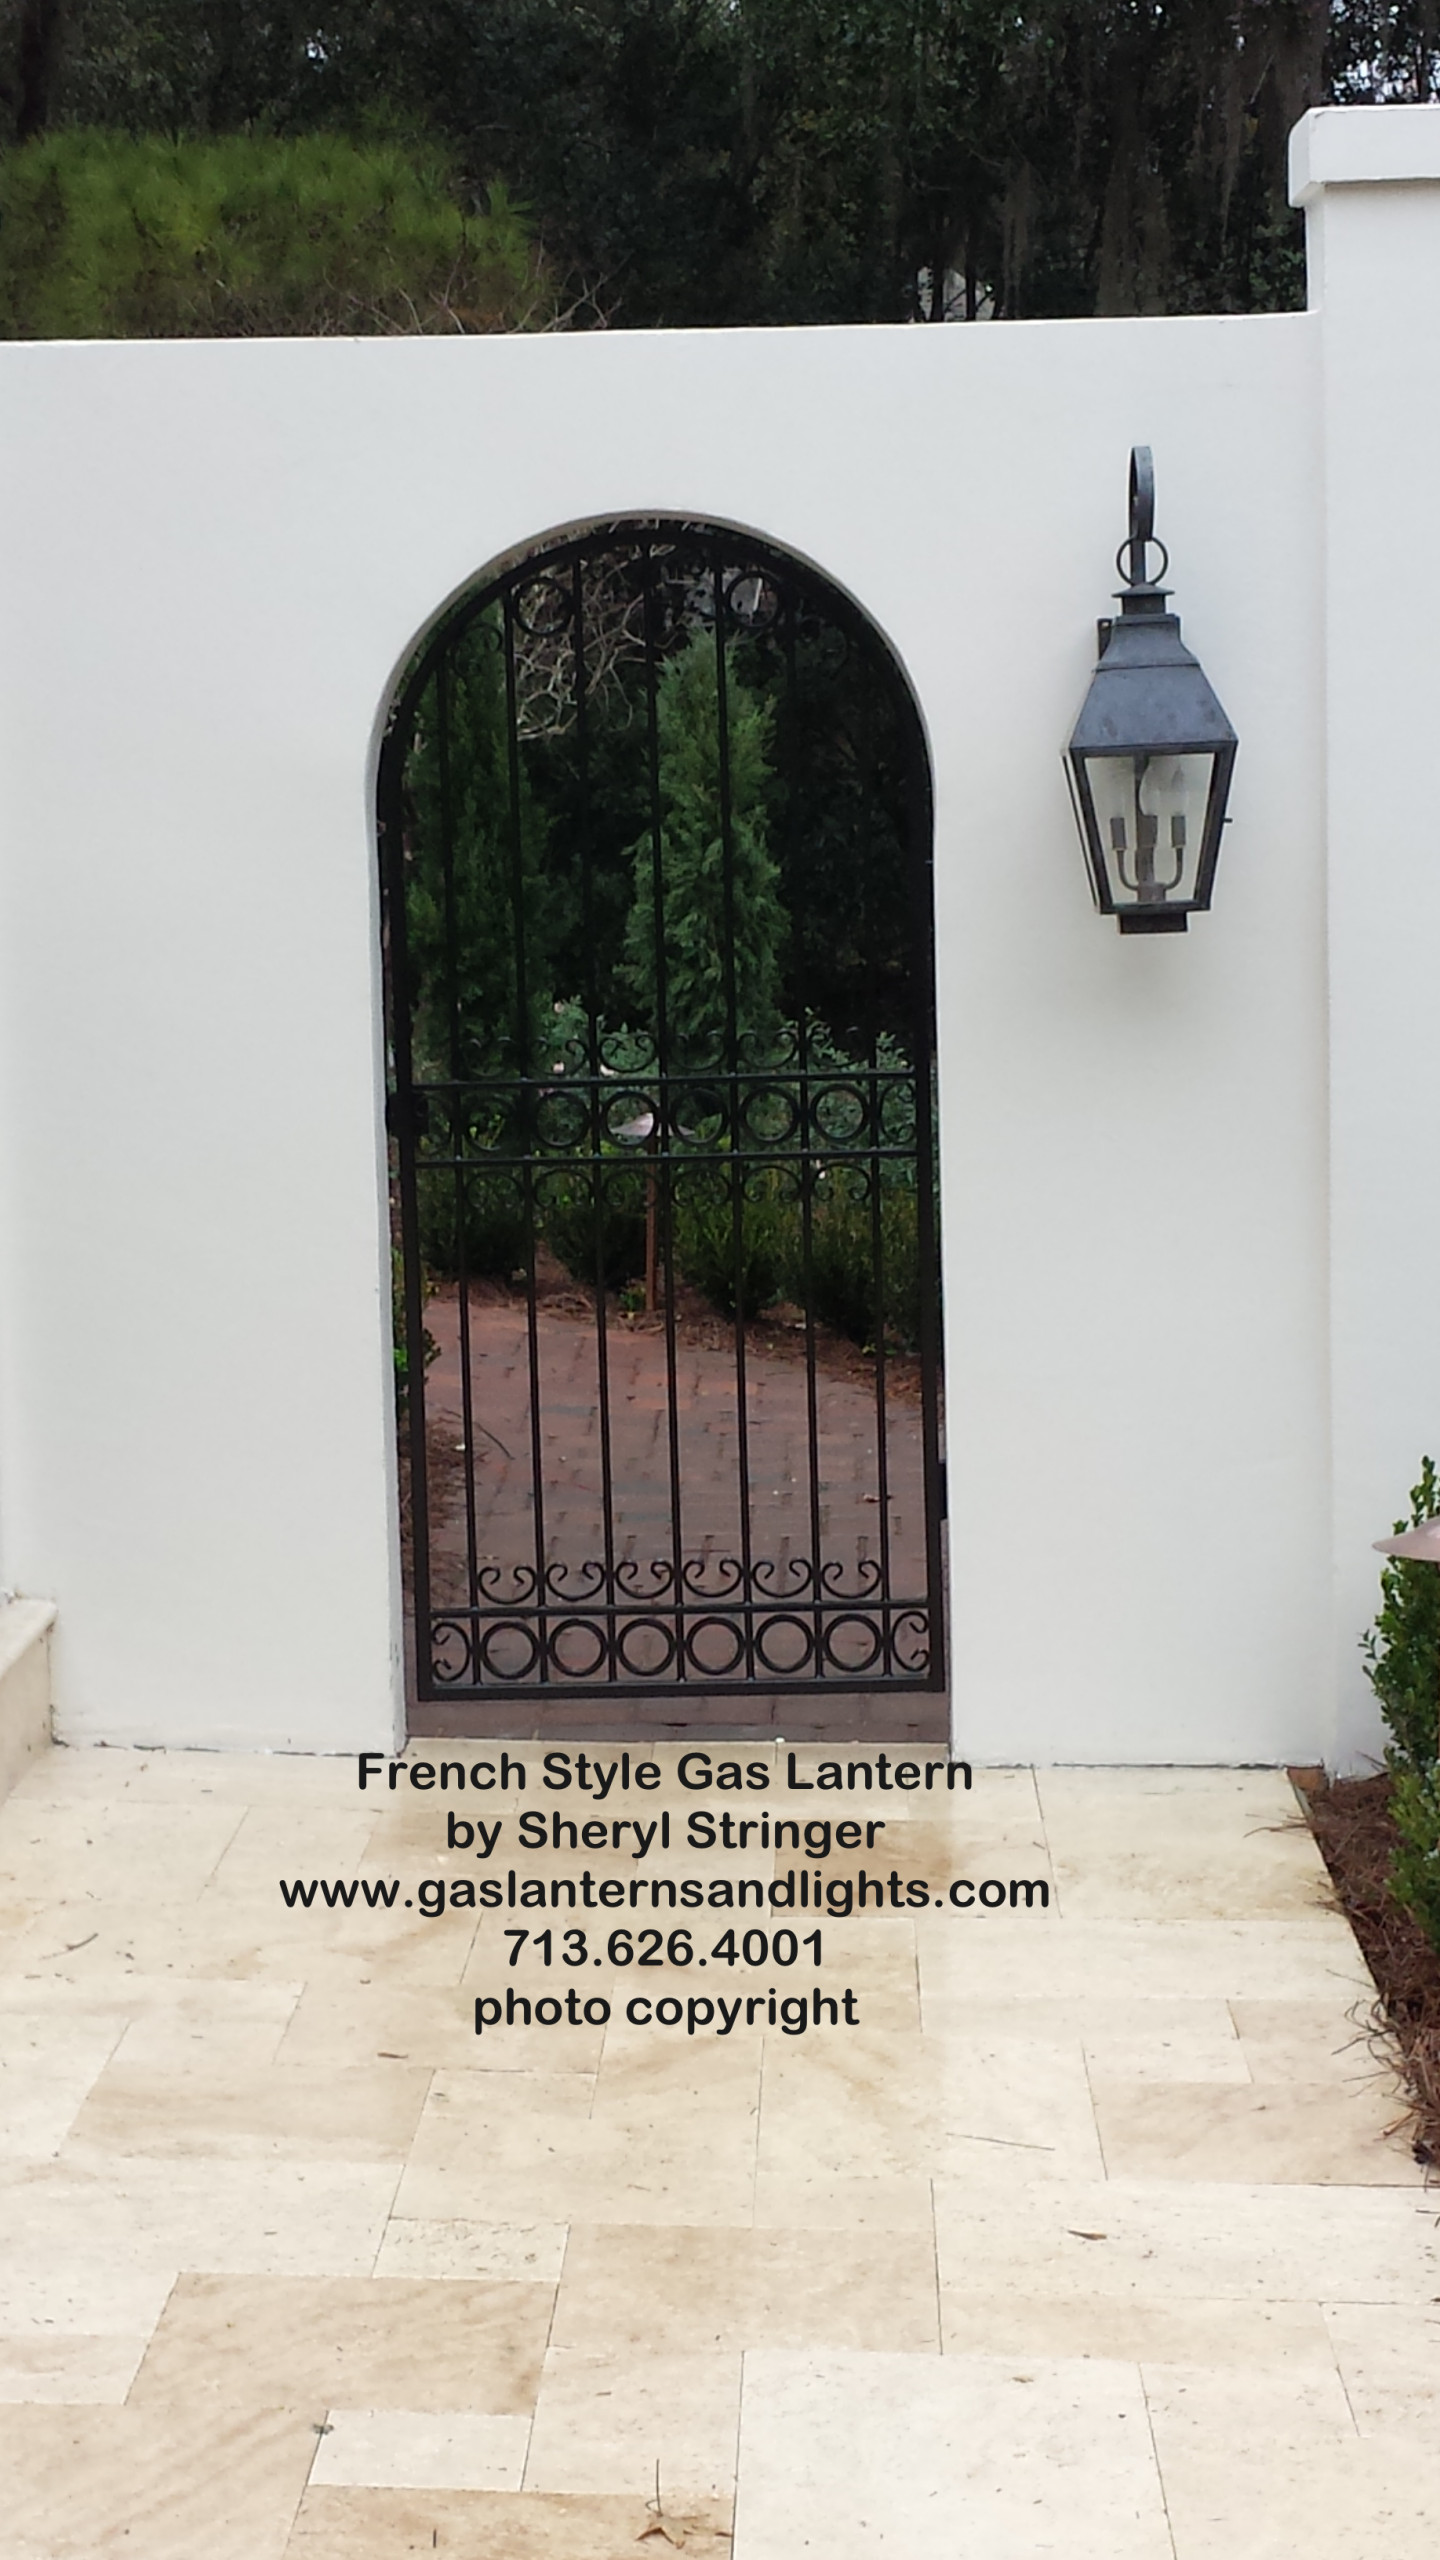 Sheryl's French Electric Lantern with Solid Top and Dark Patina